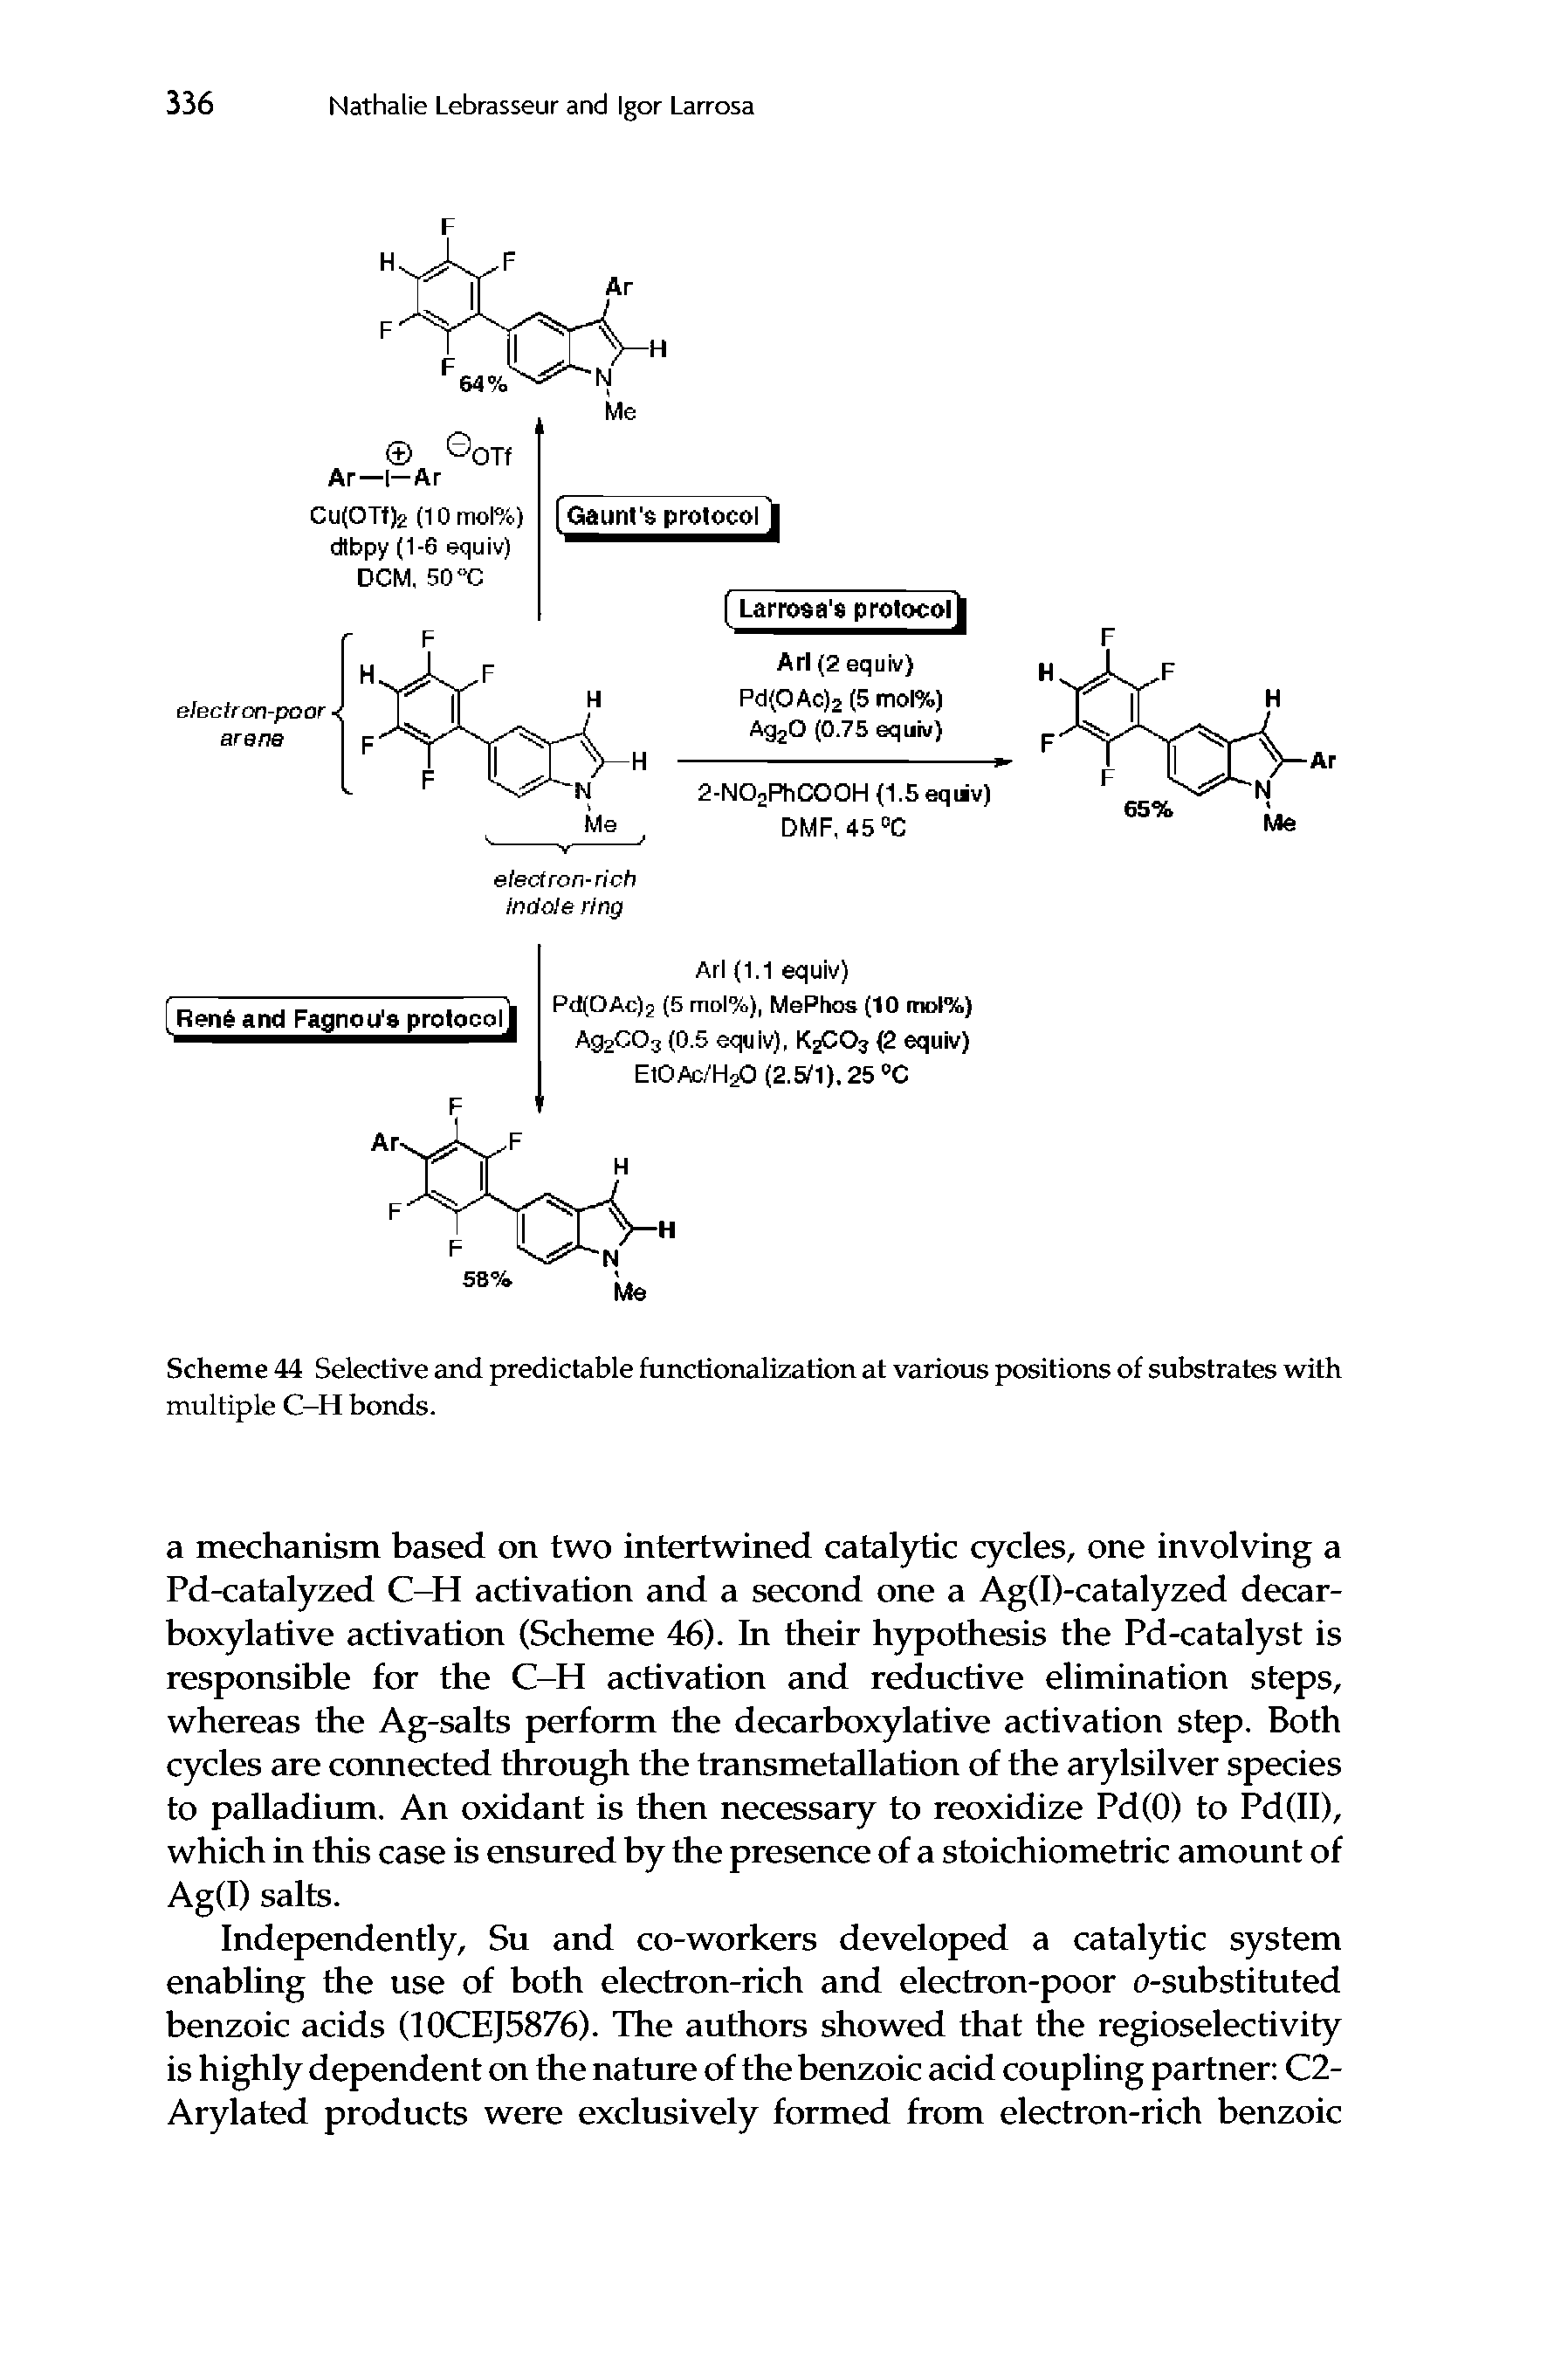 Scheme 44 Selective and predictable functionalization at various positions of substrates with multiple C-H bonds.